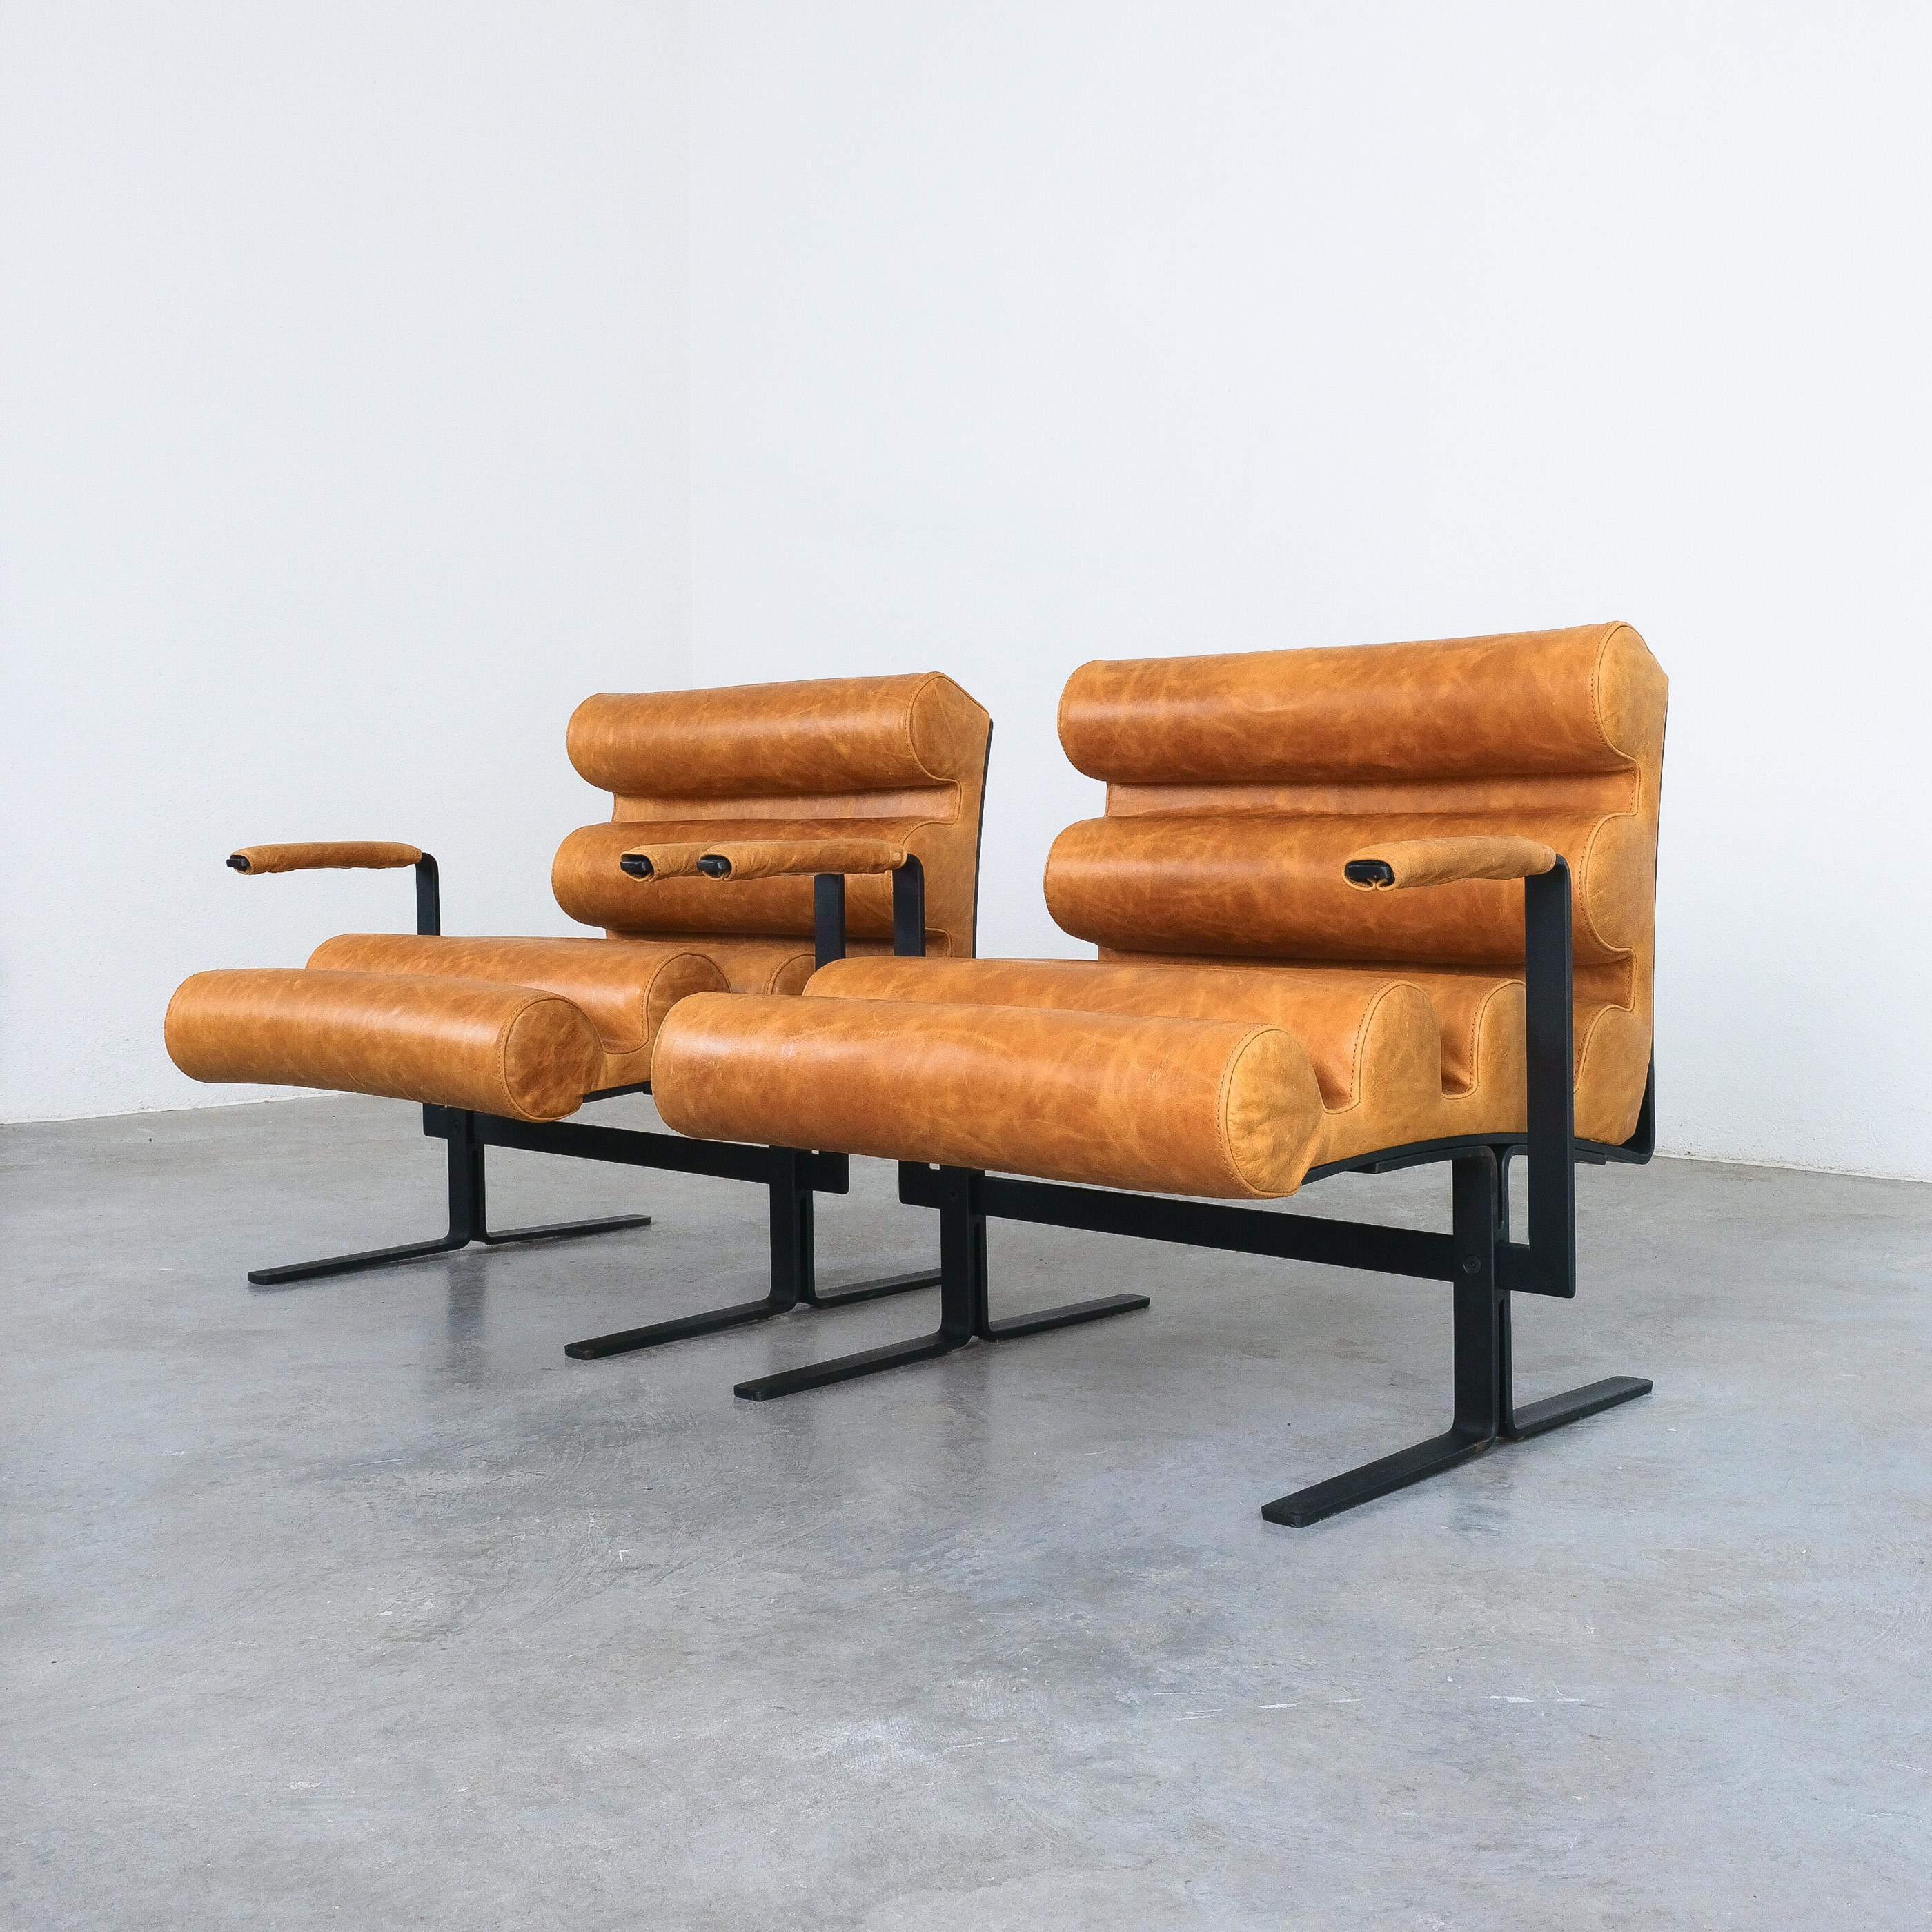 Mid-20th Century Joe Colombo For Sormani Roll Brown Leather Spring Steel Armchair Pair (2) , 1962 For Sale